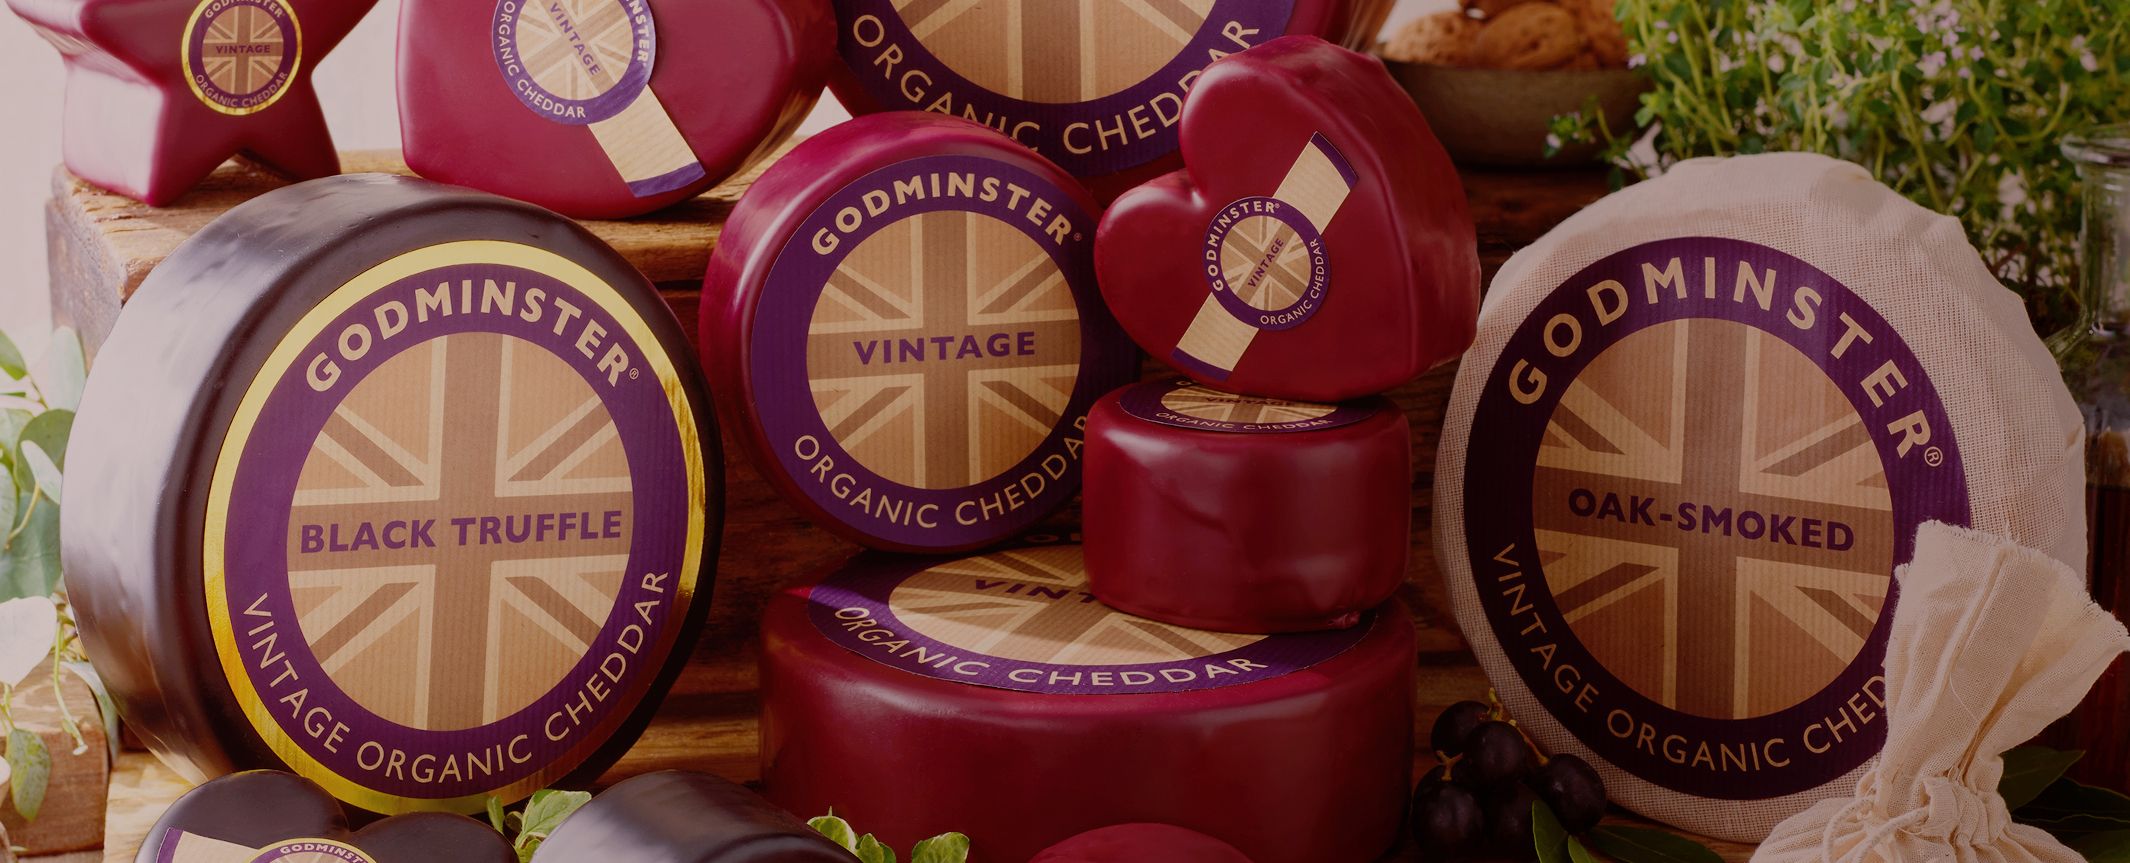 Godminster Cheese